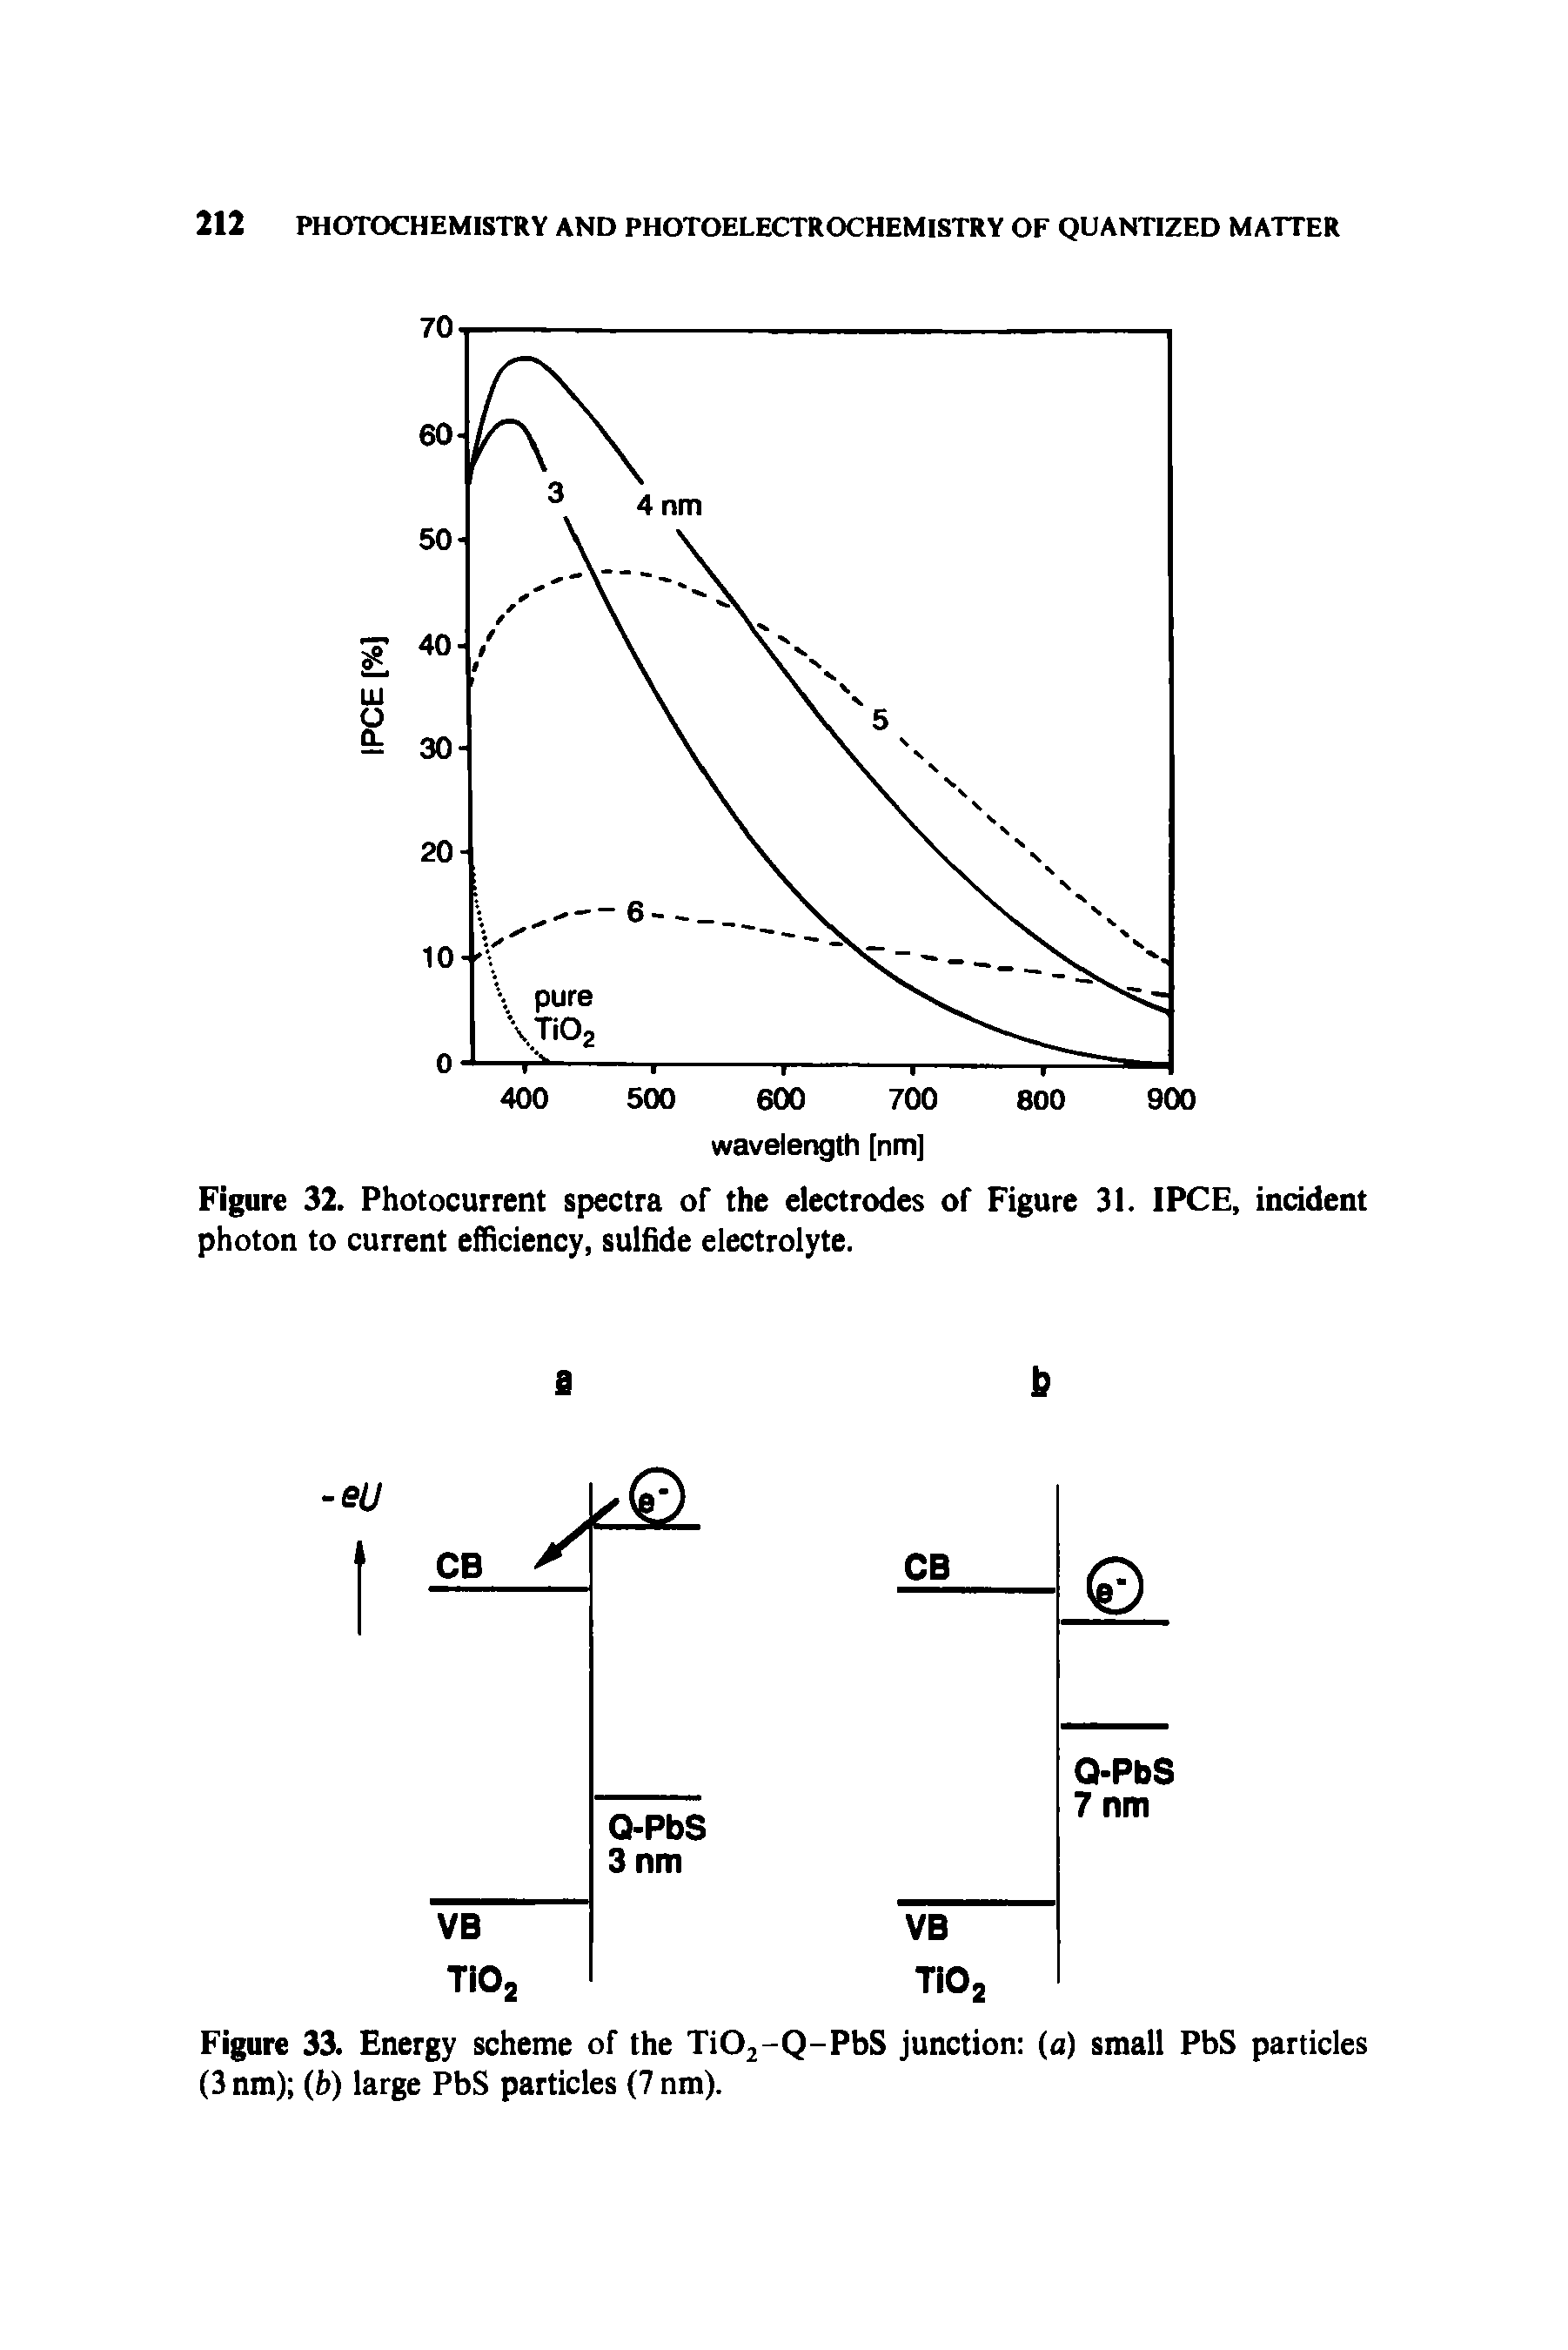 Figure 32. Photocurrent spectra of the electrodes of Figure 31. IPCE, incident photon to current efficiency, sulfide electrolyte.